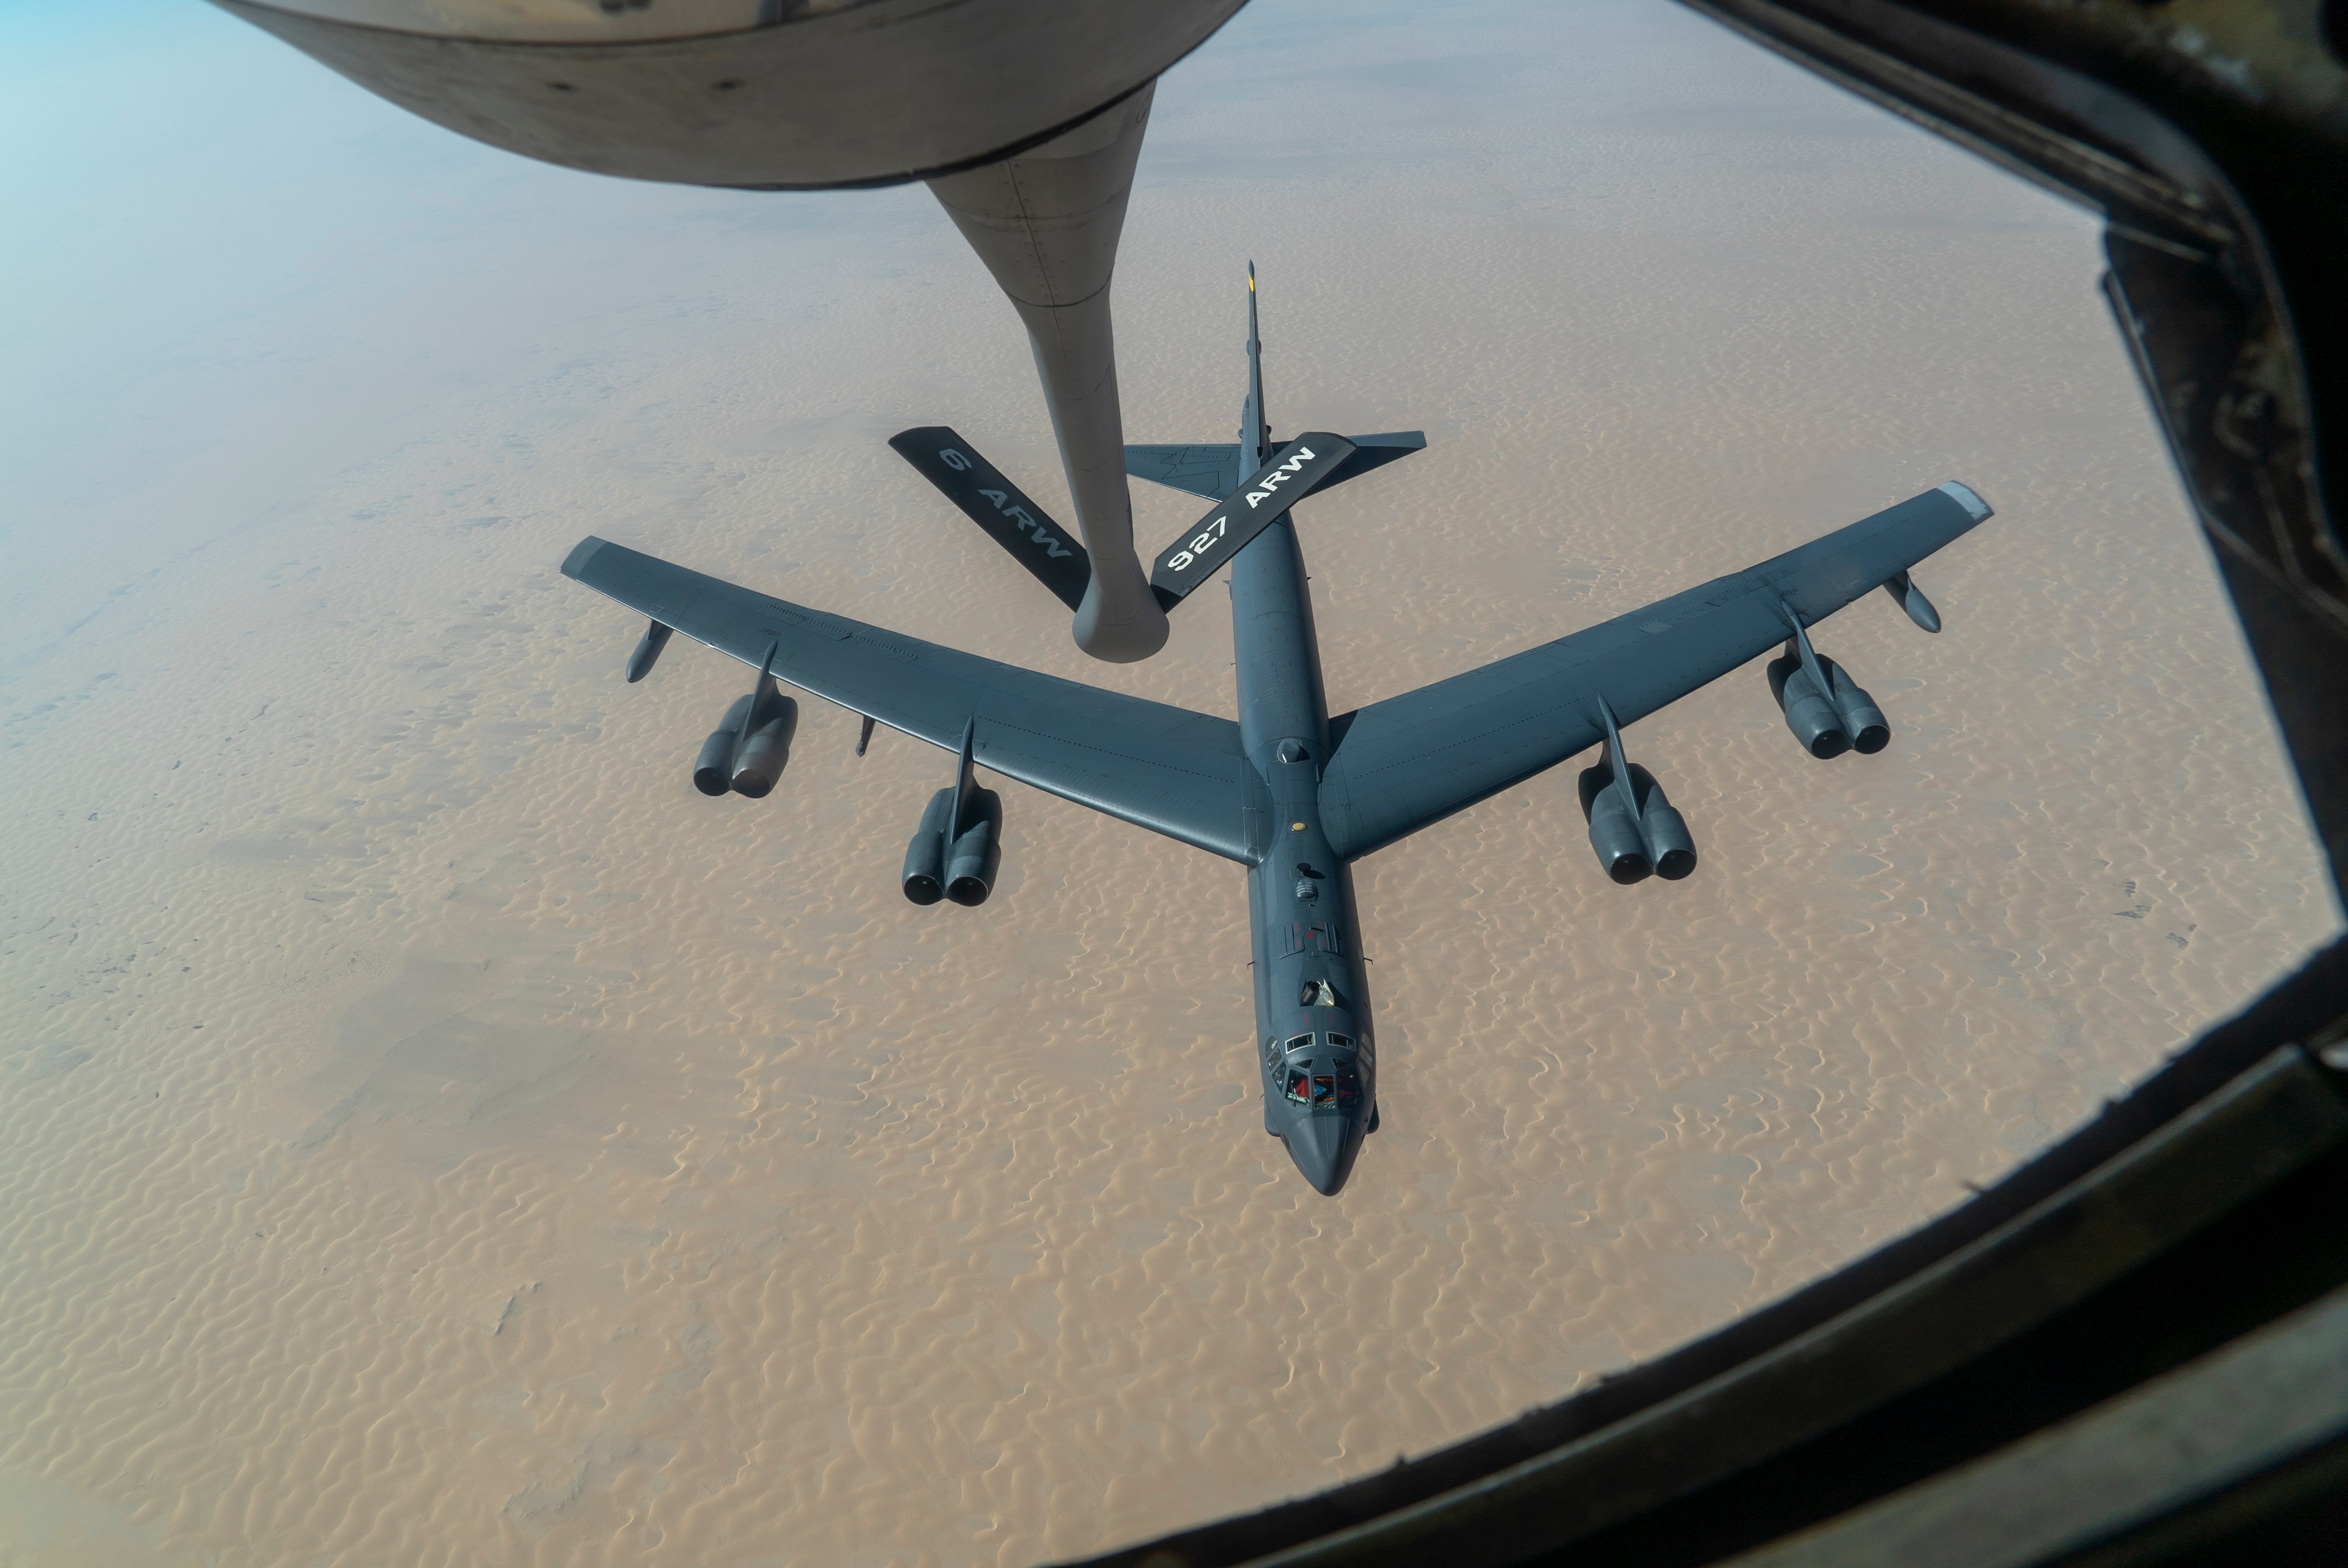 B-52s fly over the Persian Gulf as they fear “complex attacks” from Iran, USA ready to stop